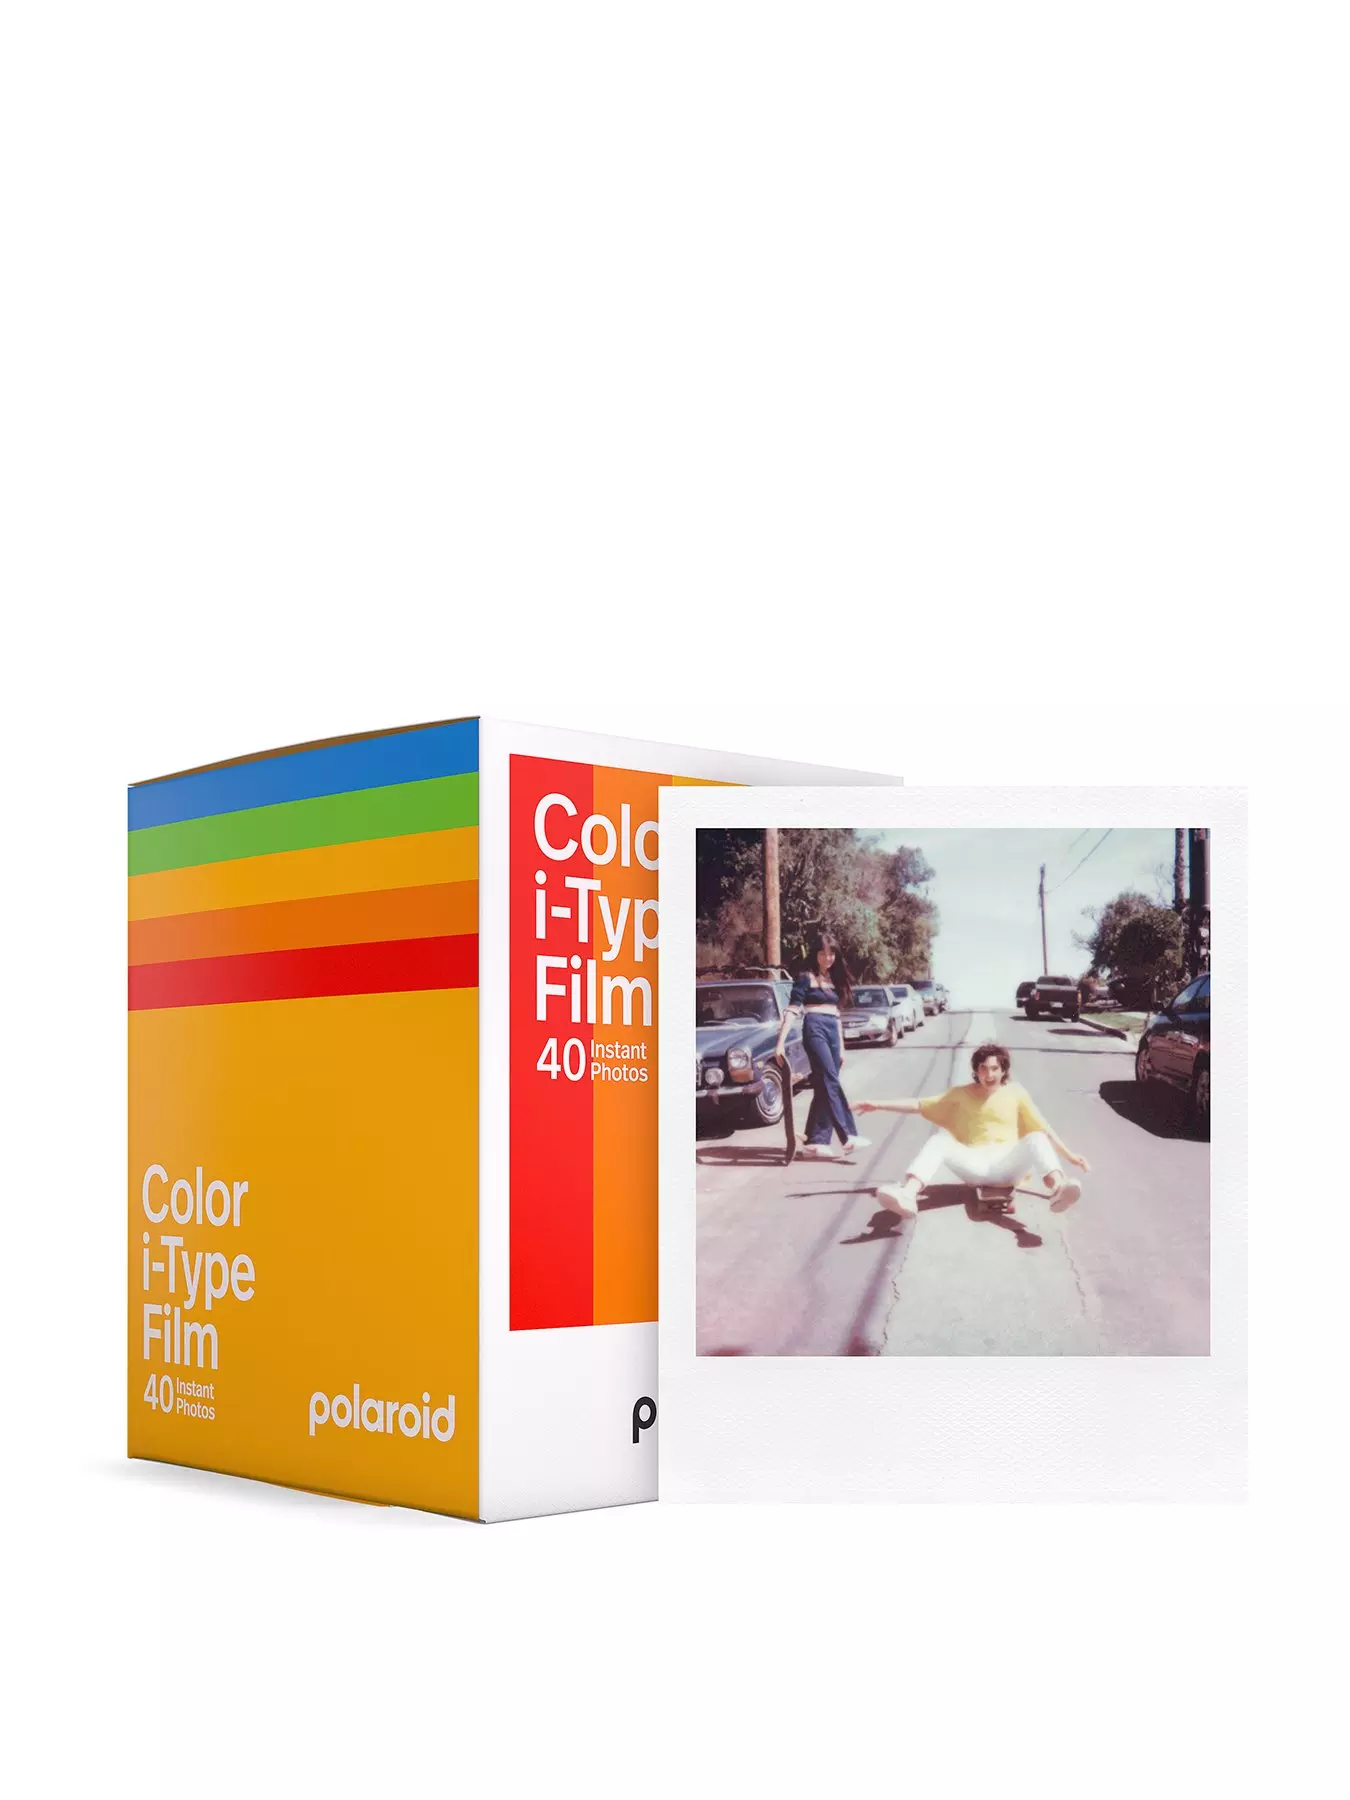 Polaroid Color Film for i-Type (5 packs of 8 Sheets total of 40 photos) +  Album